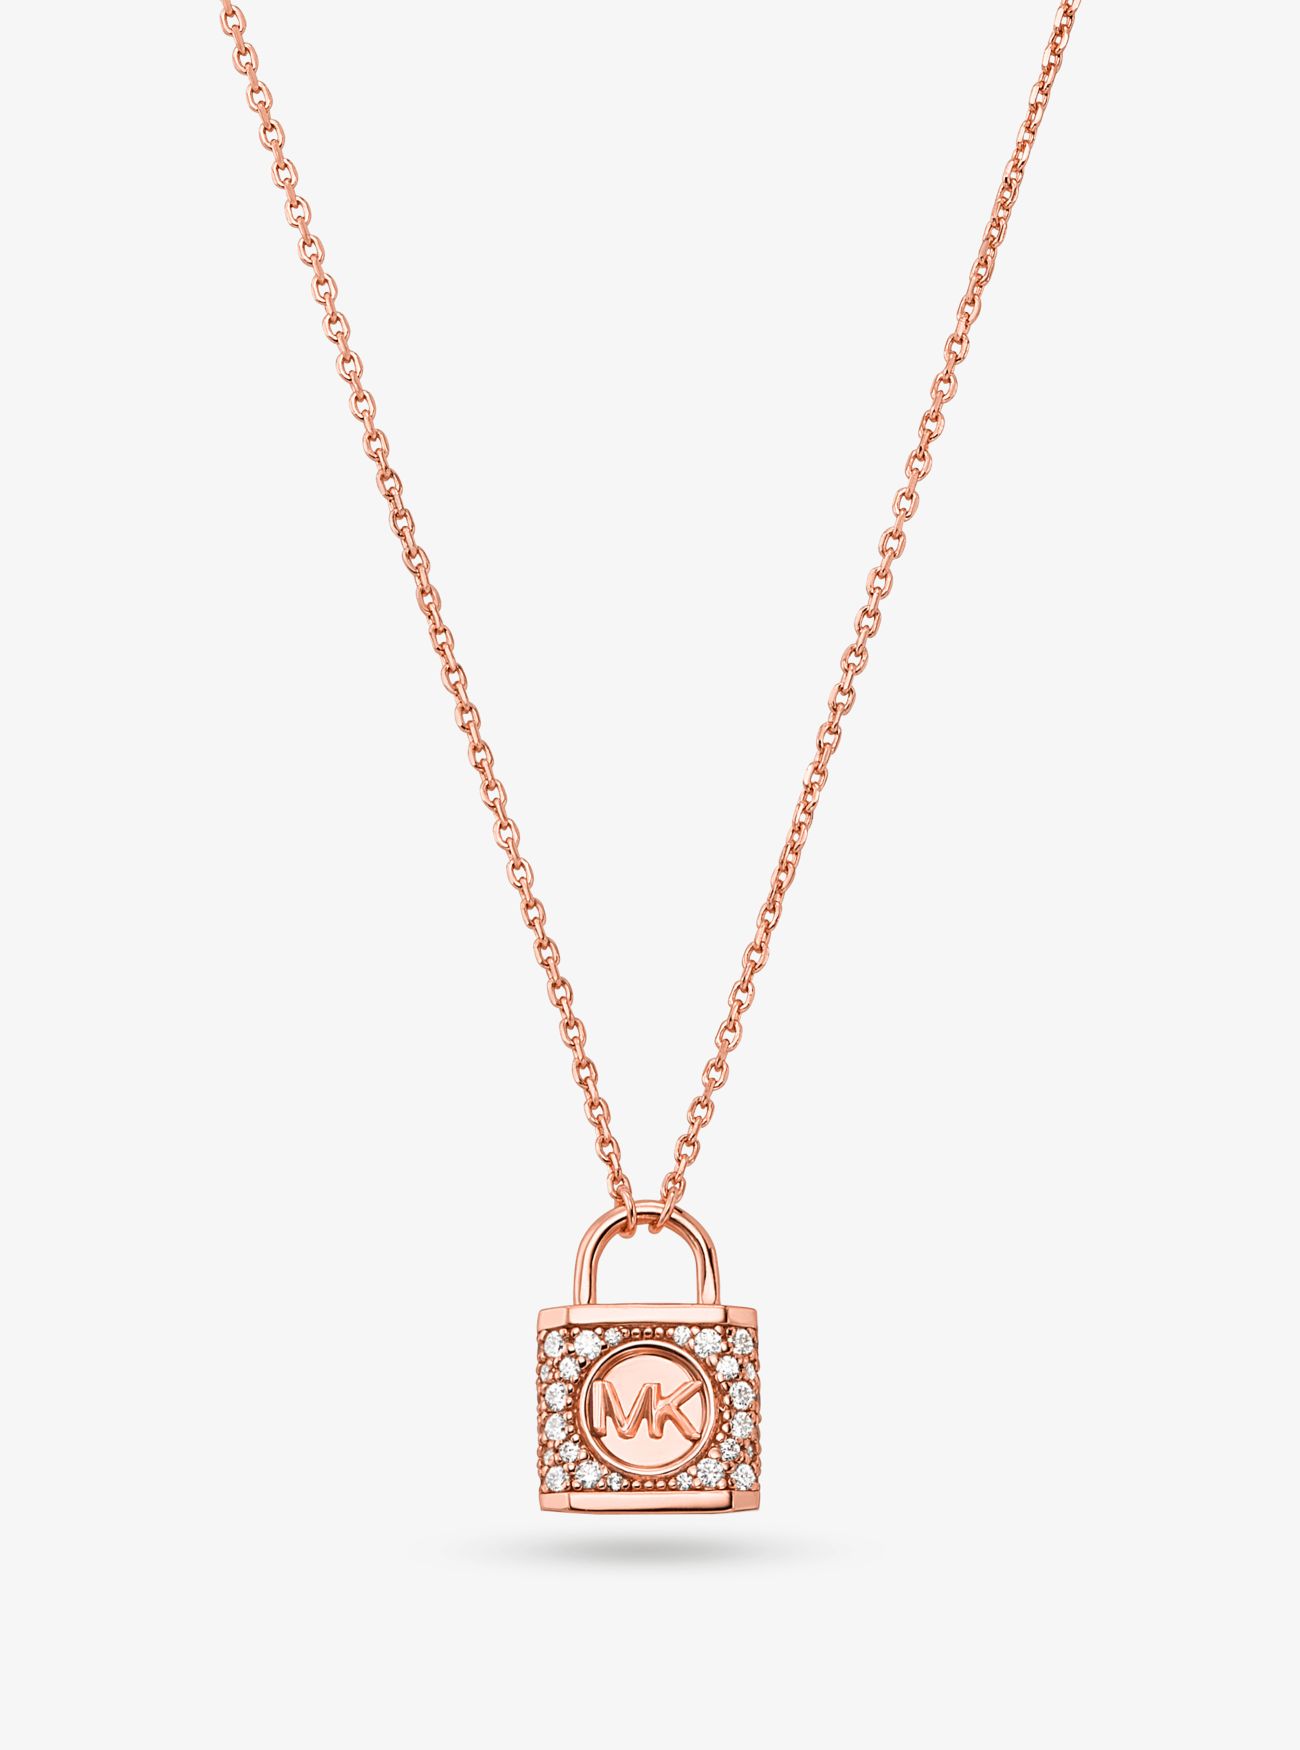 MK Precious Metal-Plated Sterling Silver Pavé Lock Necklace - Rose Gold - Michael Kors